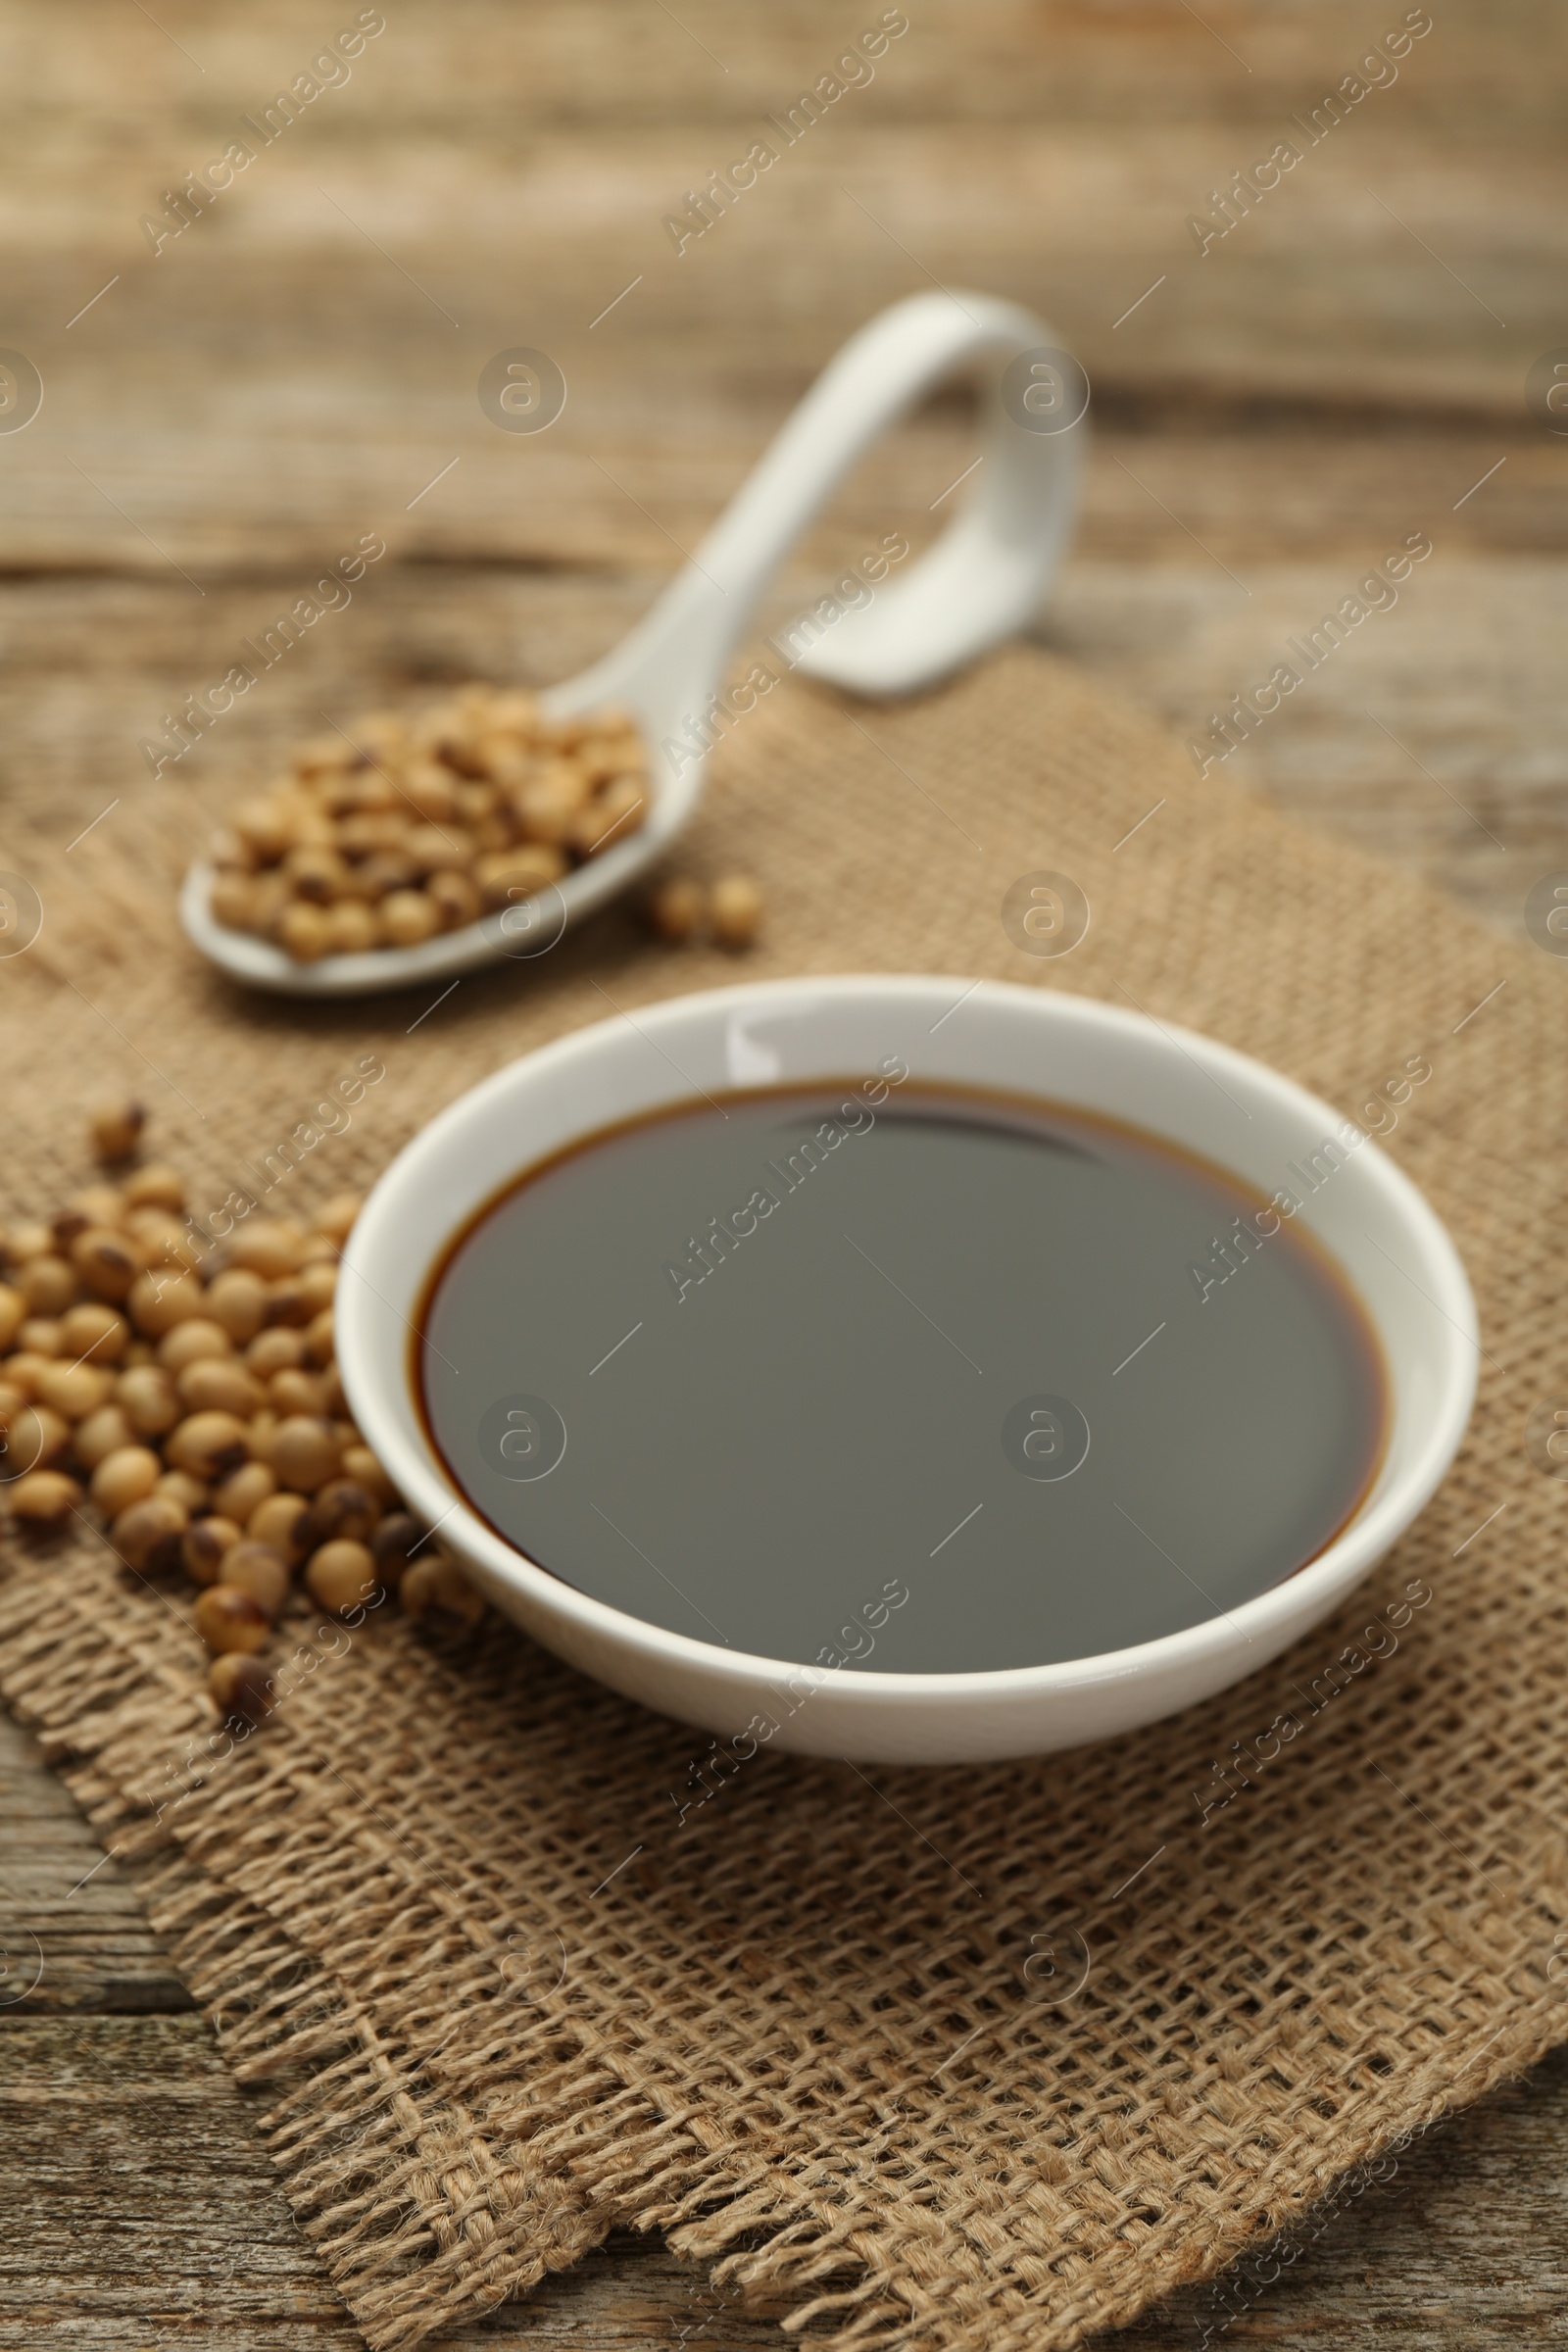 Photo of Soy sauce in bowl and beans on wooden table, closeup